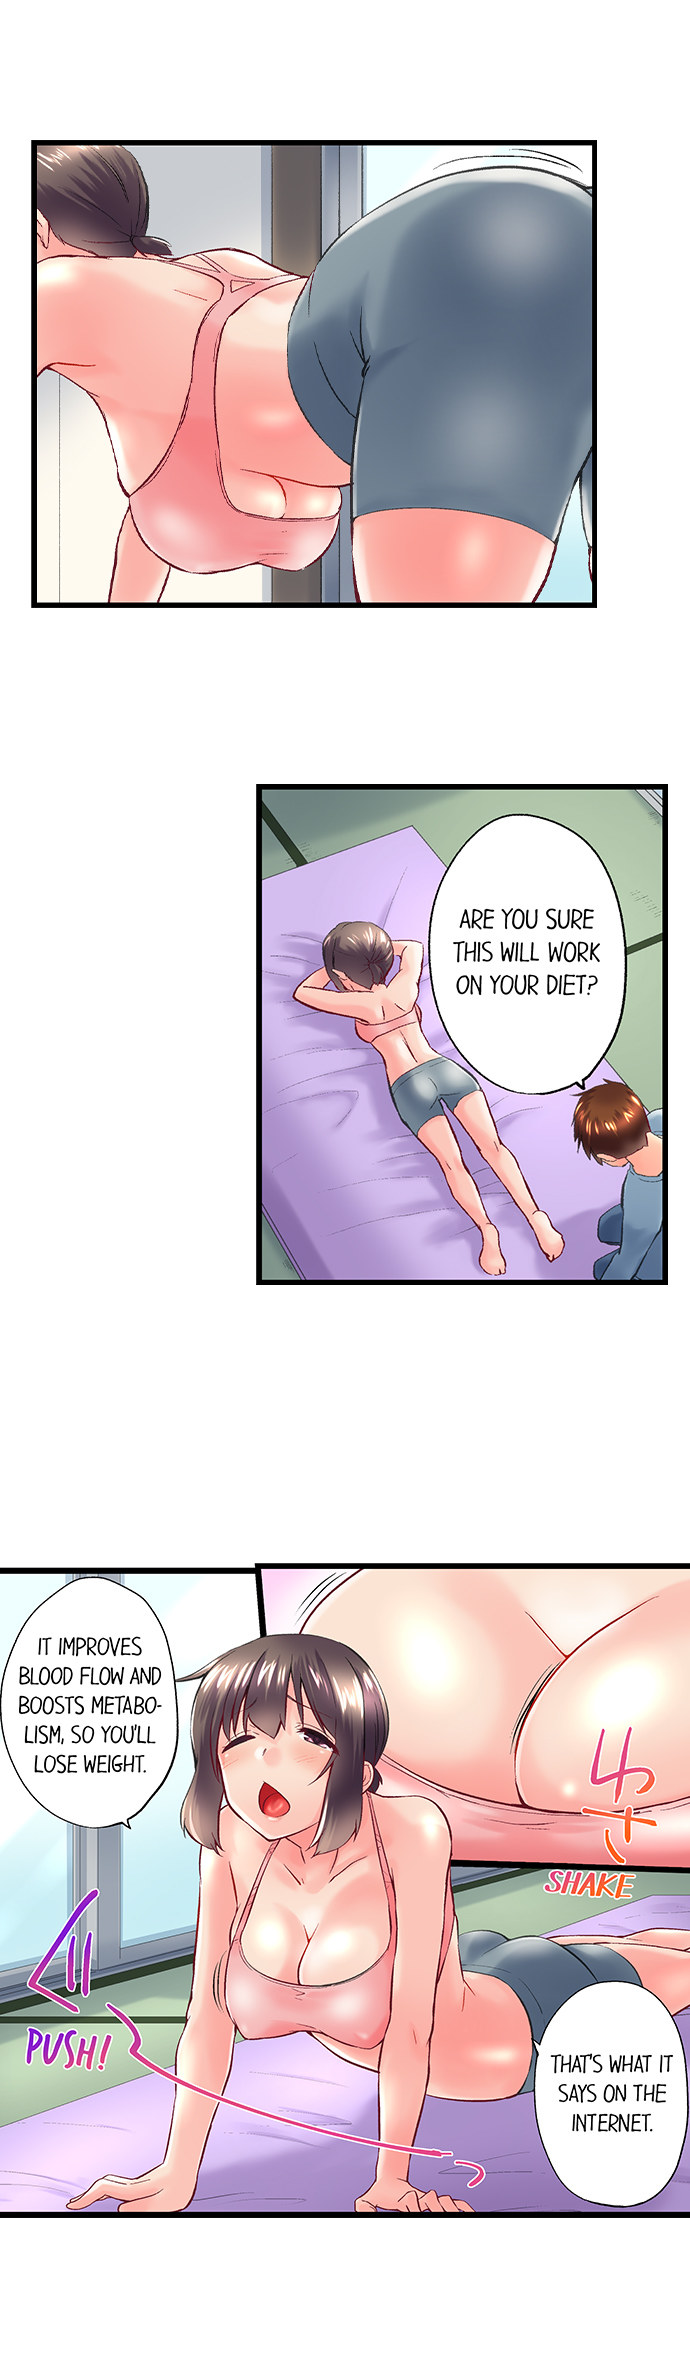 My Brother’s Slipped Inside Me in The Bathtub - Chapter 104 Page 5